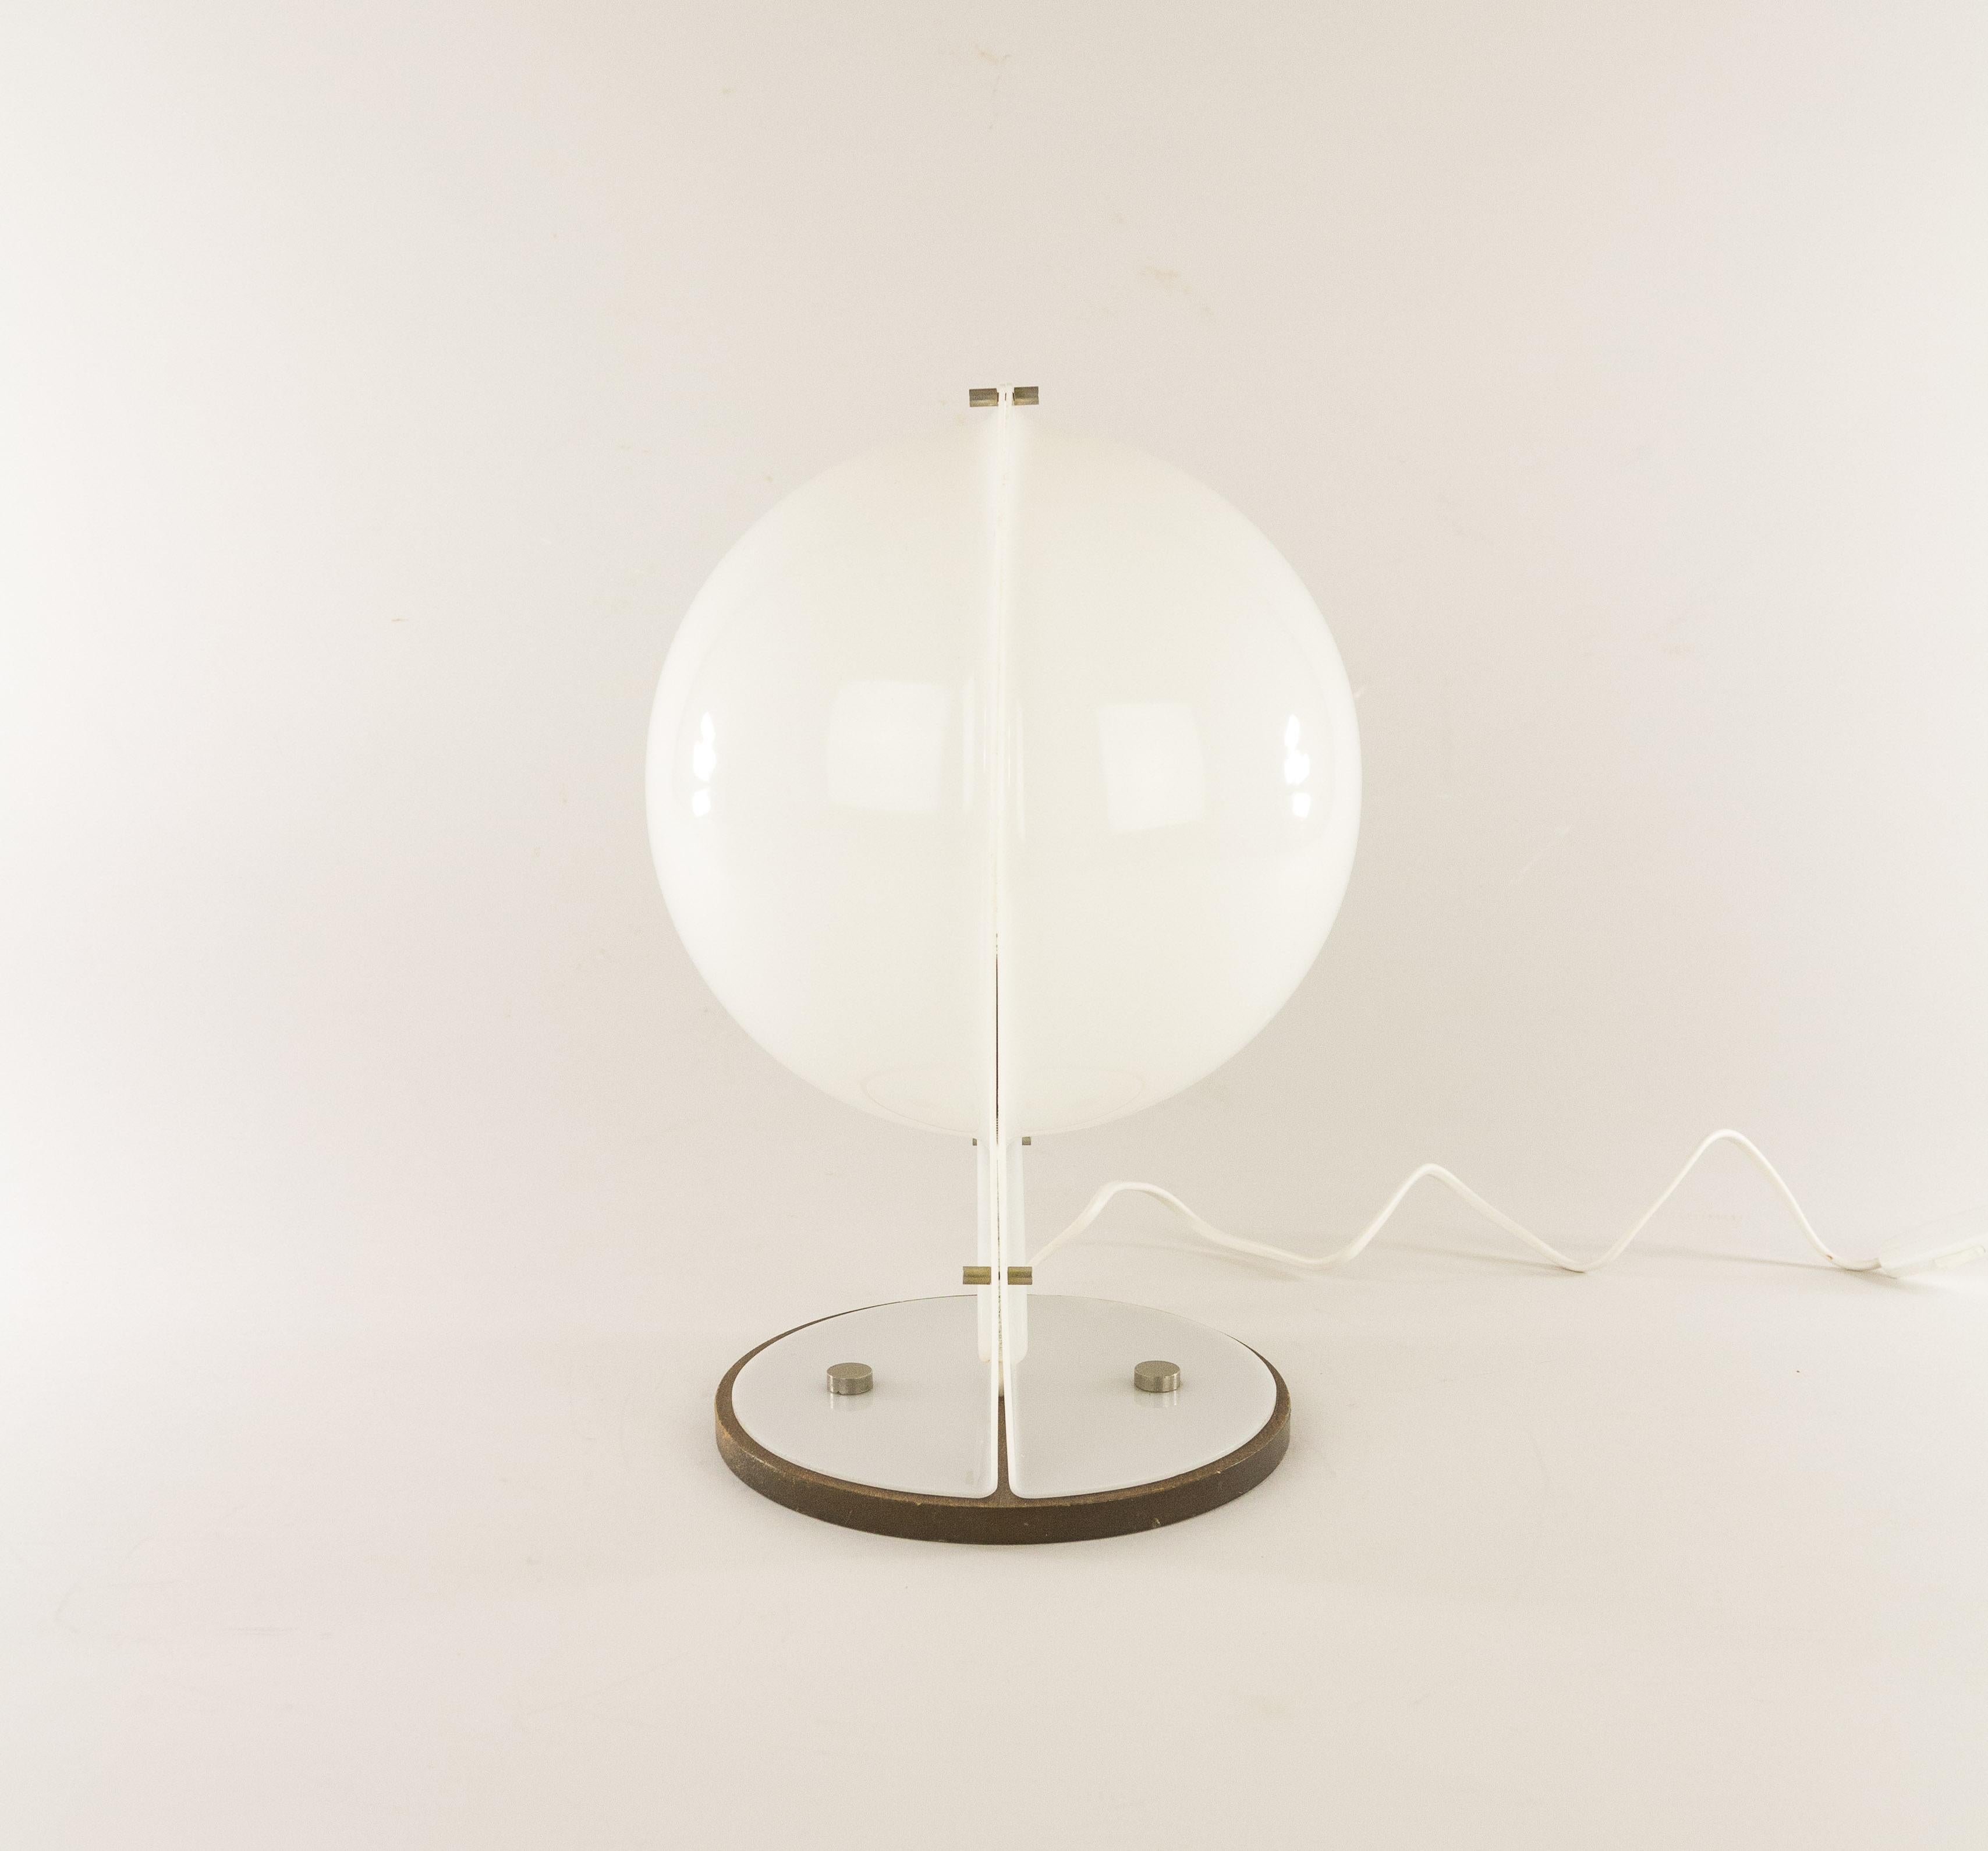 White table lamp from probably Italy and made in the 1970s. The piece is made of two white half-spheres in molded plastic that are connected by small decorative elements.

This lamp resembles the Sirio table lamp that is designed by Sergio